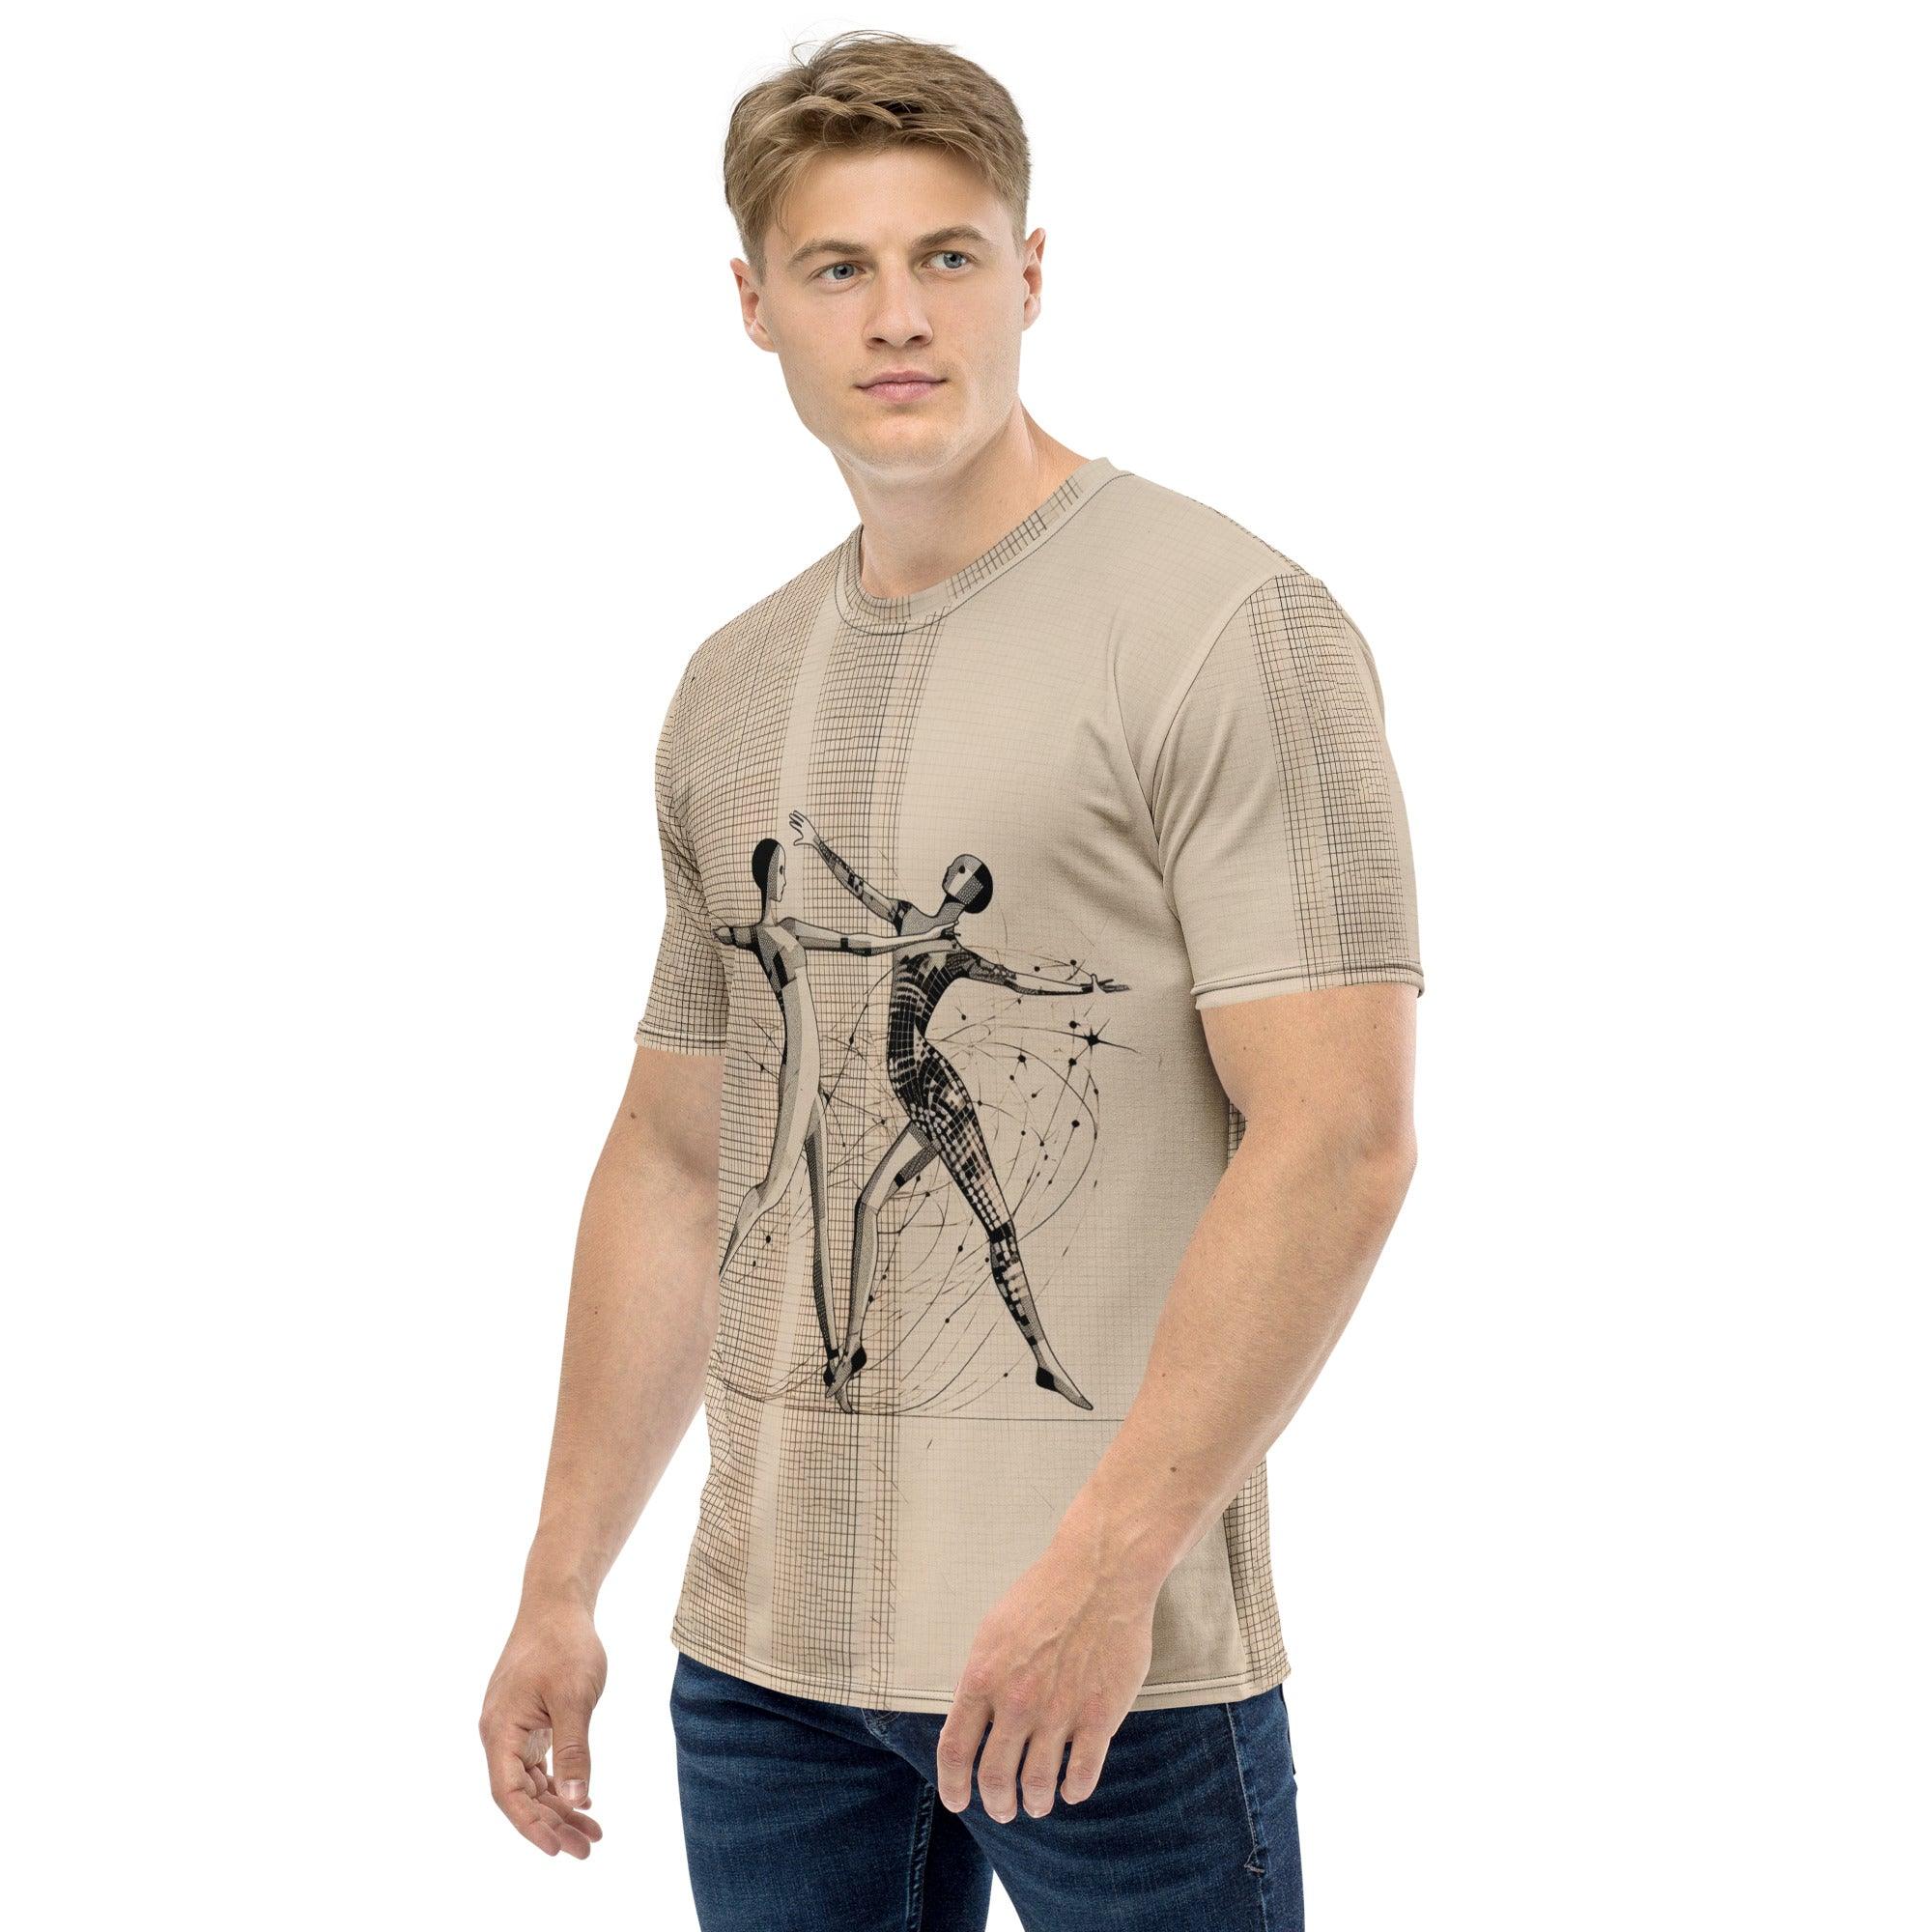 Sultry Women's Dance Style Men's T-shirt - Beyond T-shirts